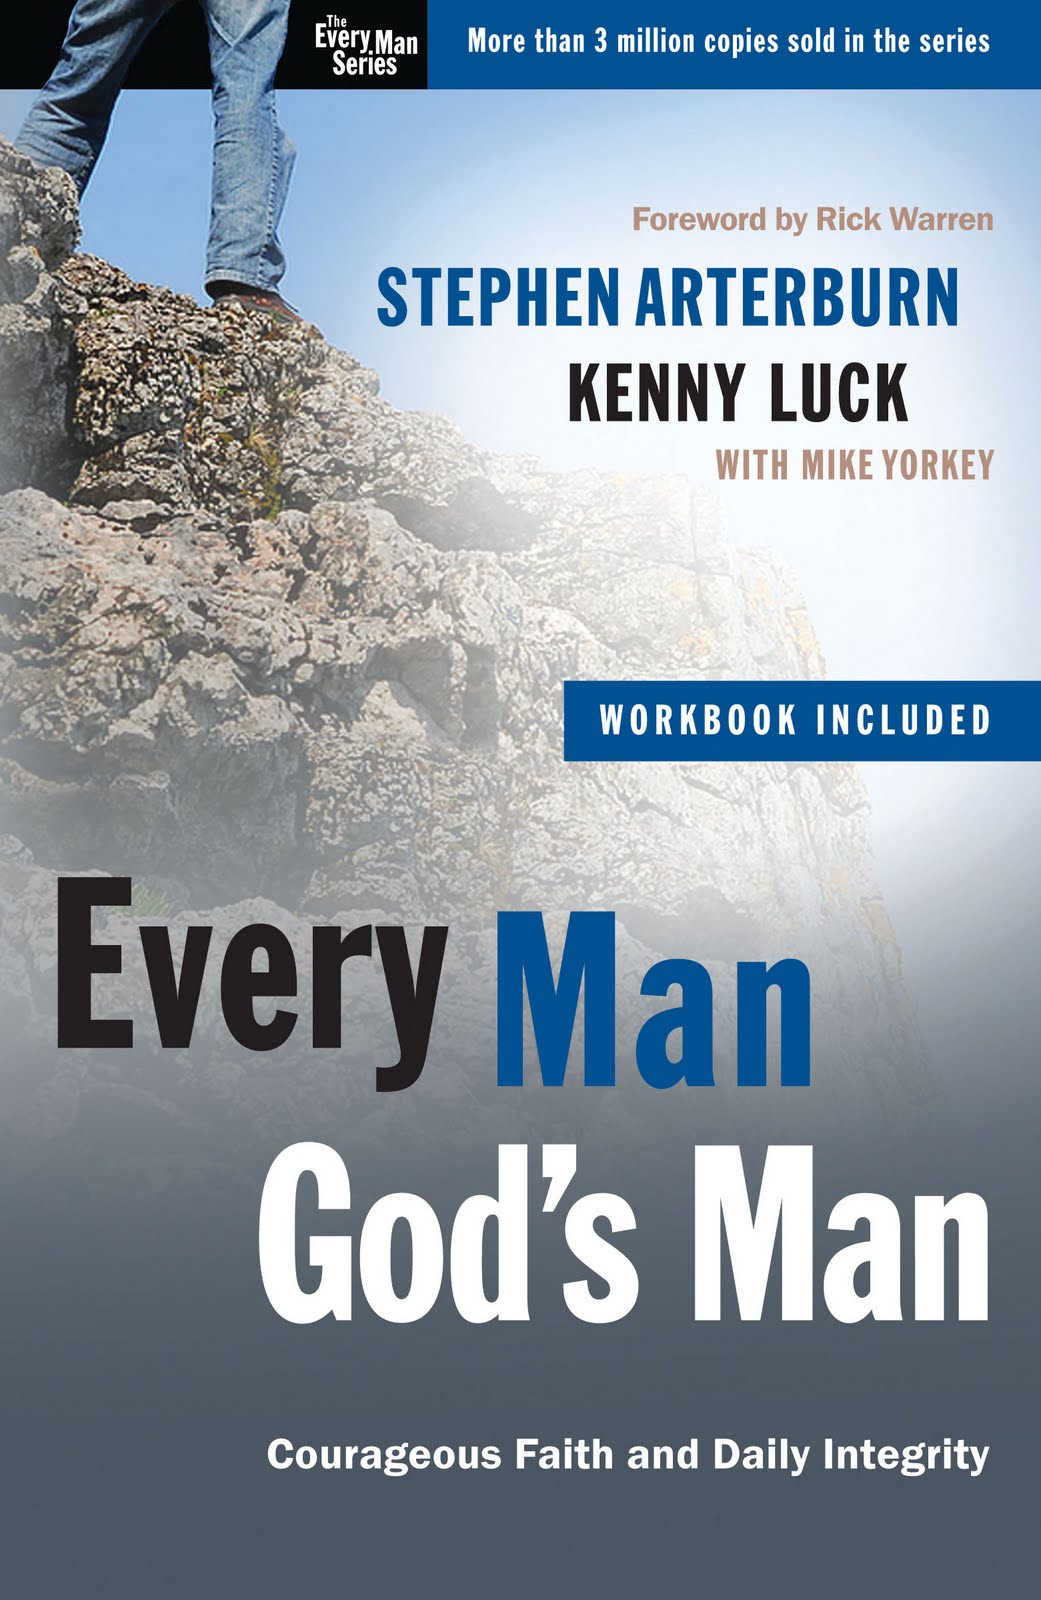 WORD up!: Every Man, God's Man by Stephen Arterburn and Kenny Luck